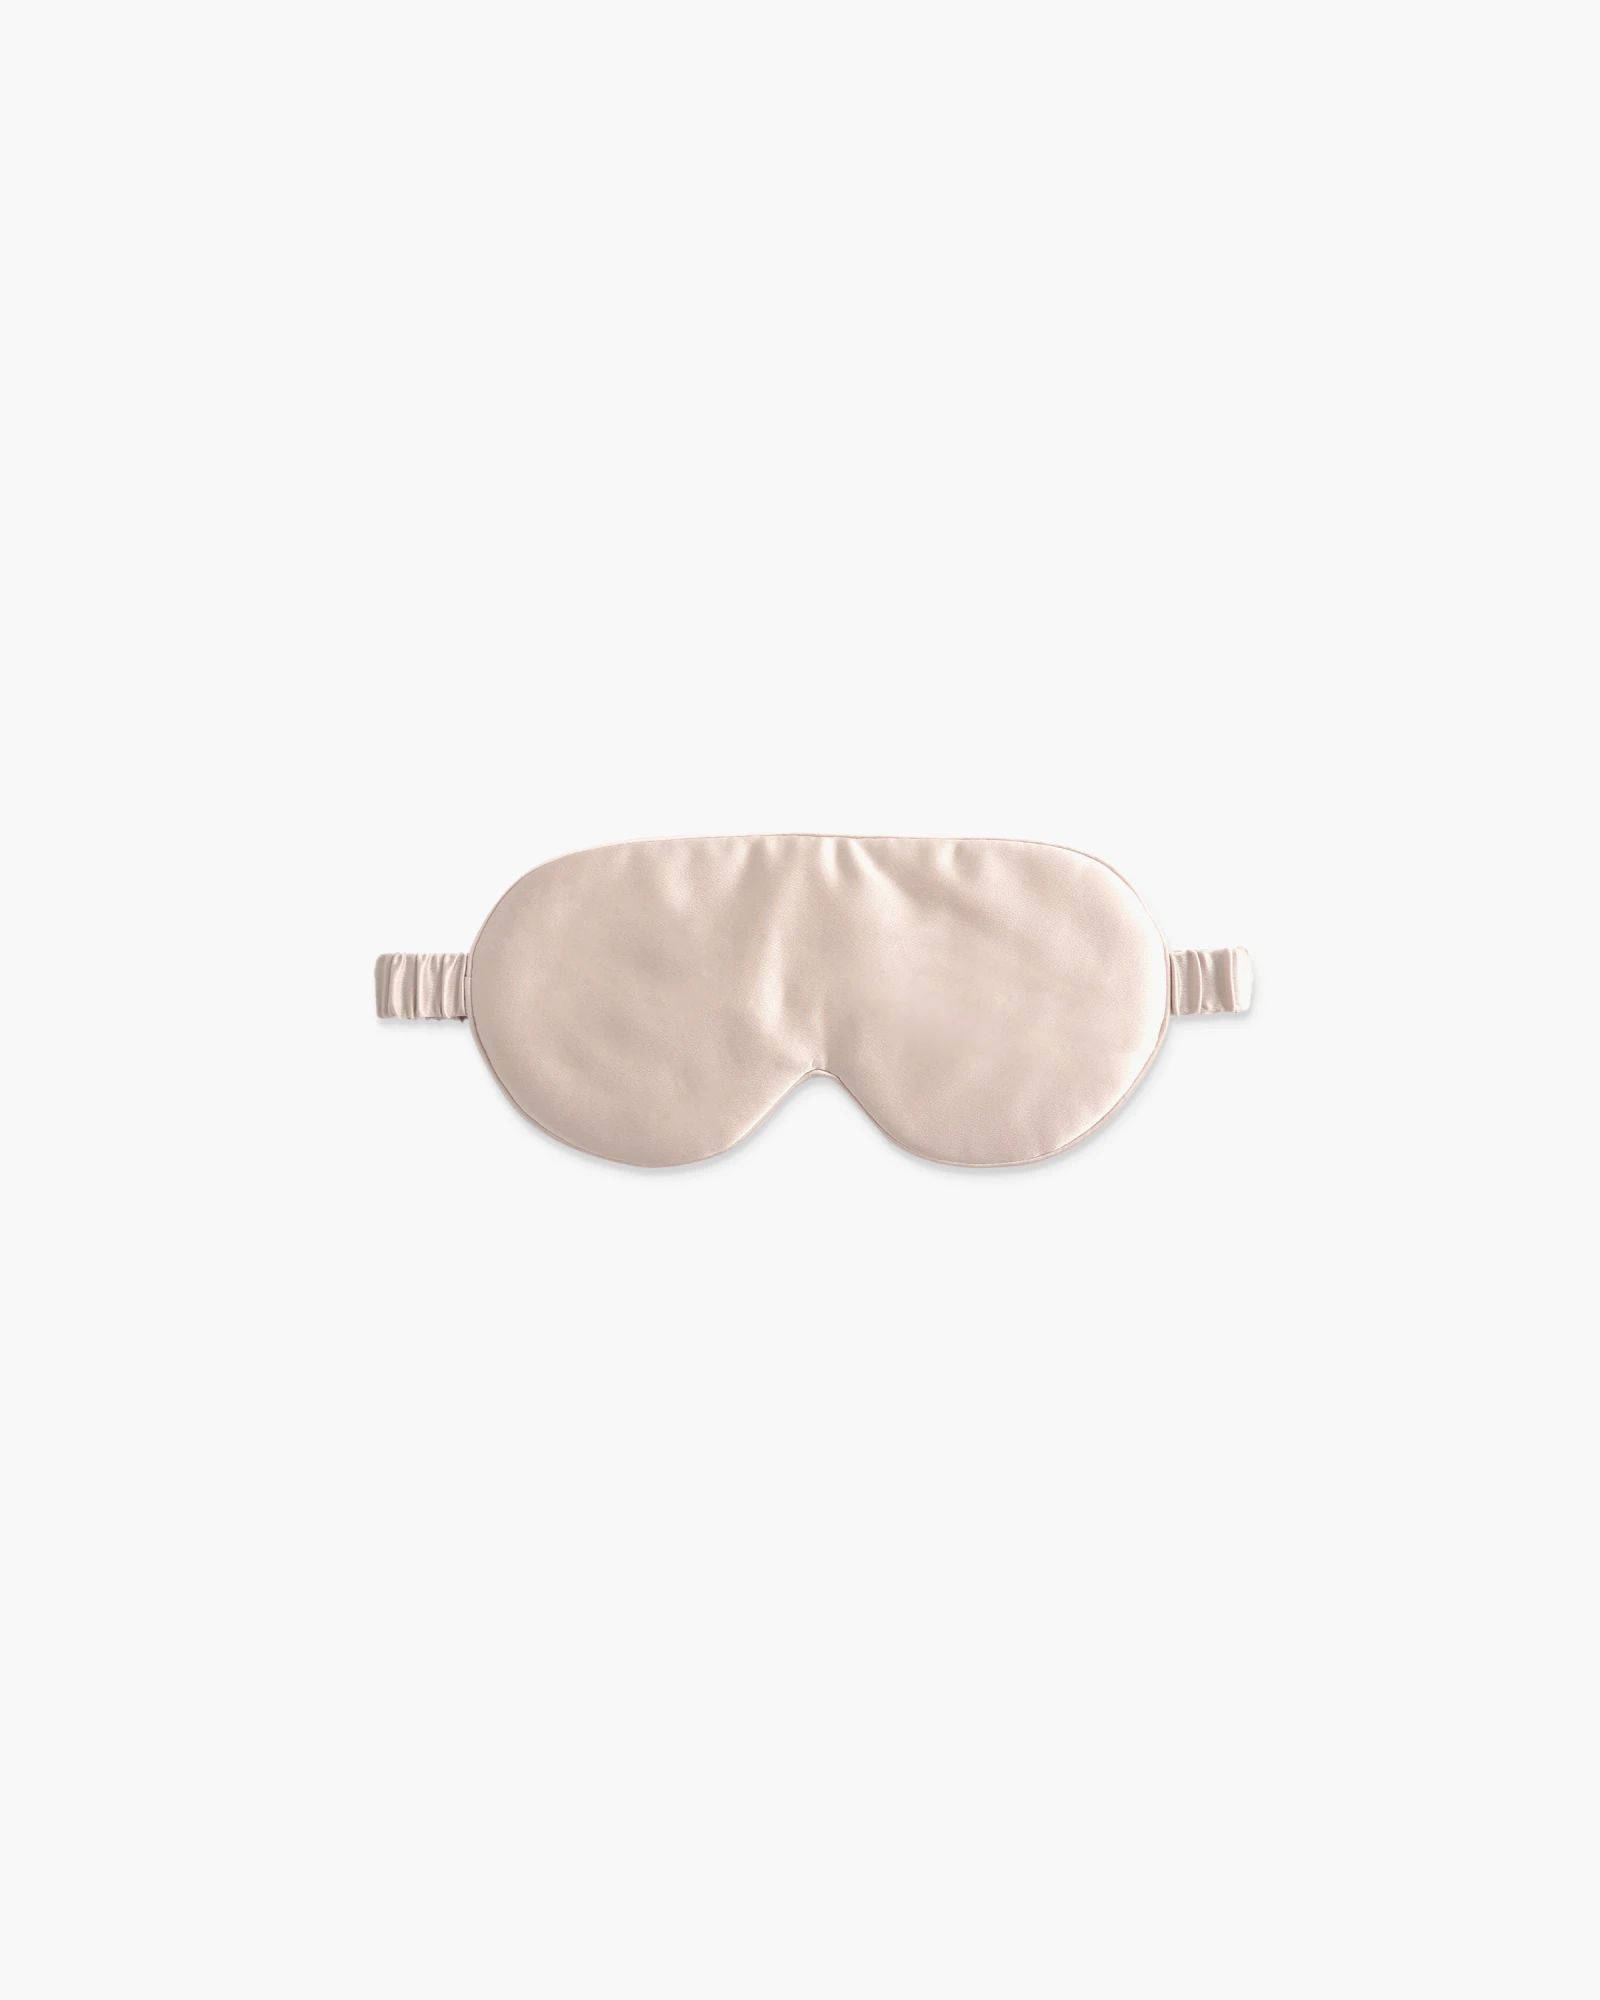 Mulberry Silk Beauty Sleep Mask | Quince | Quince